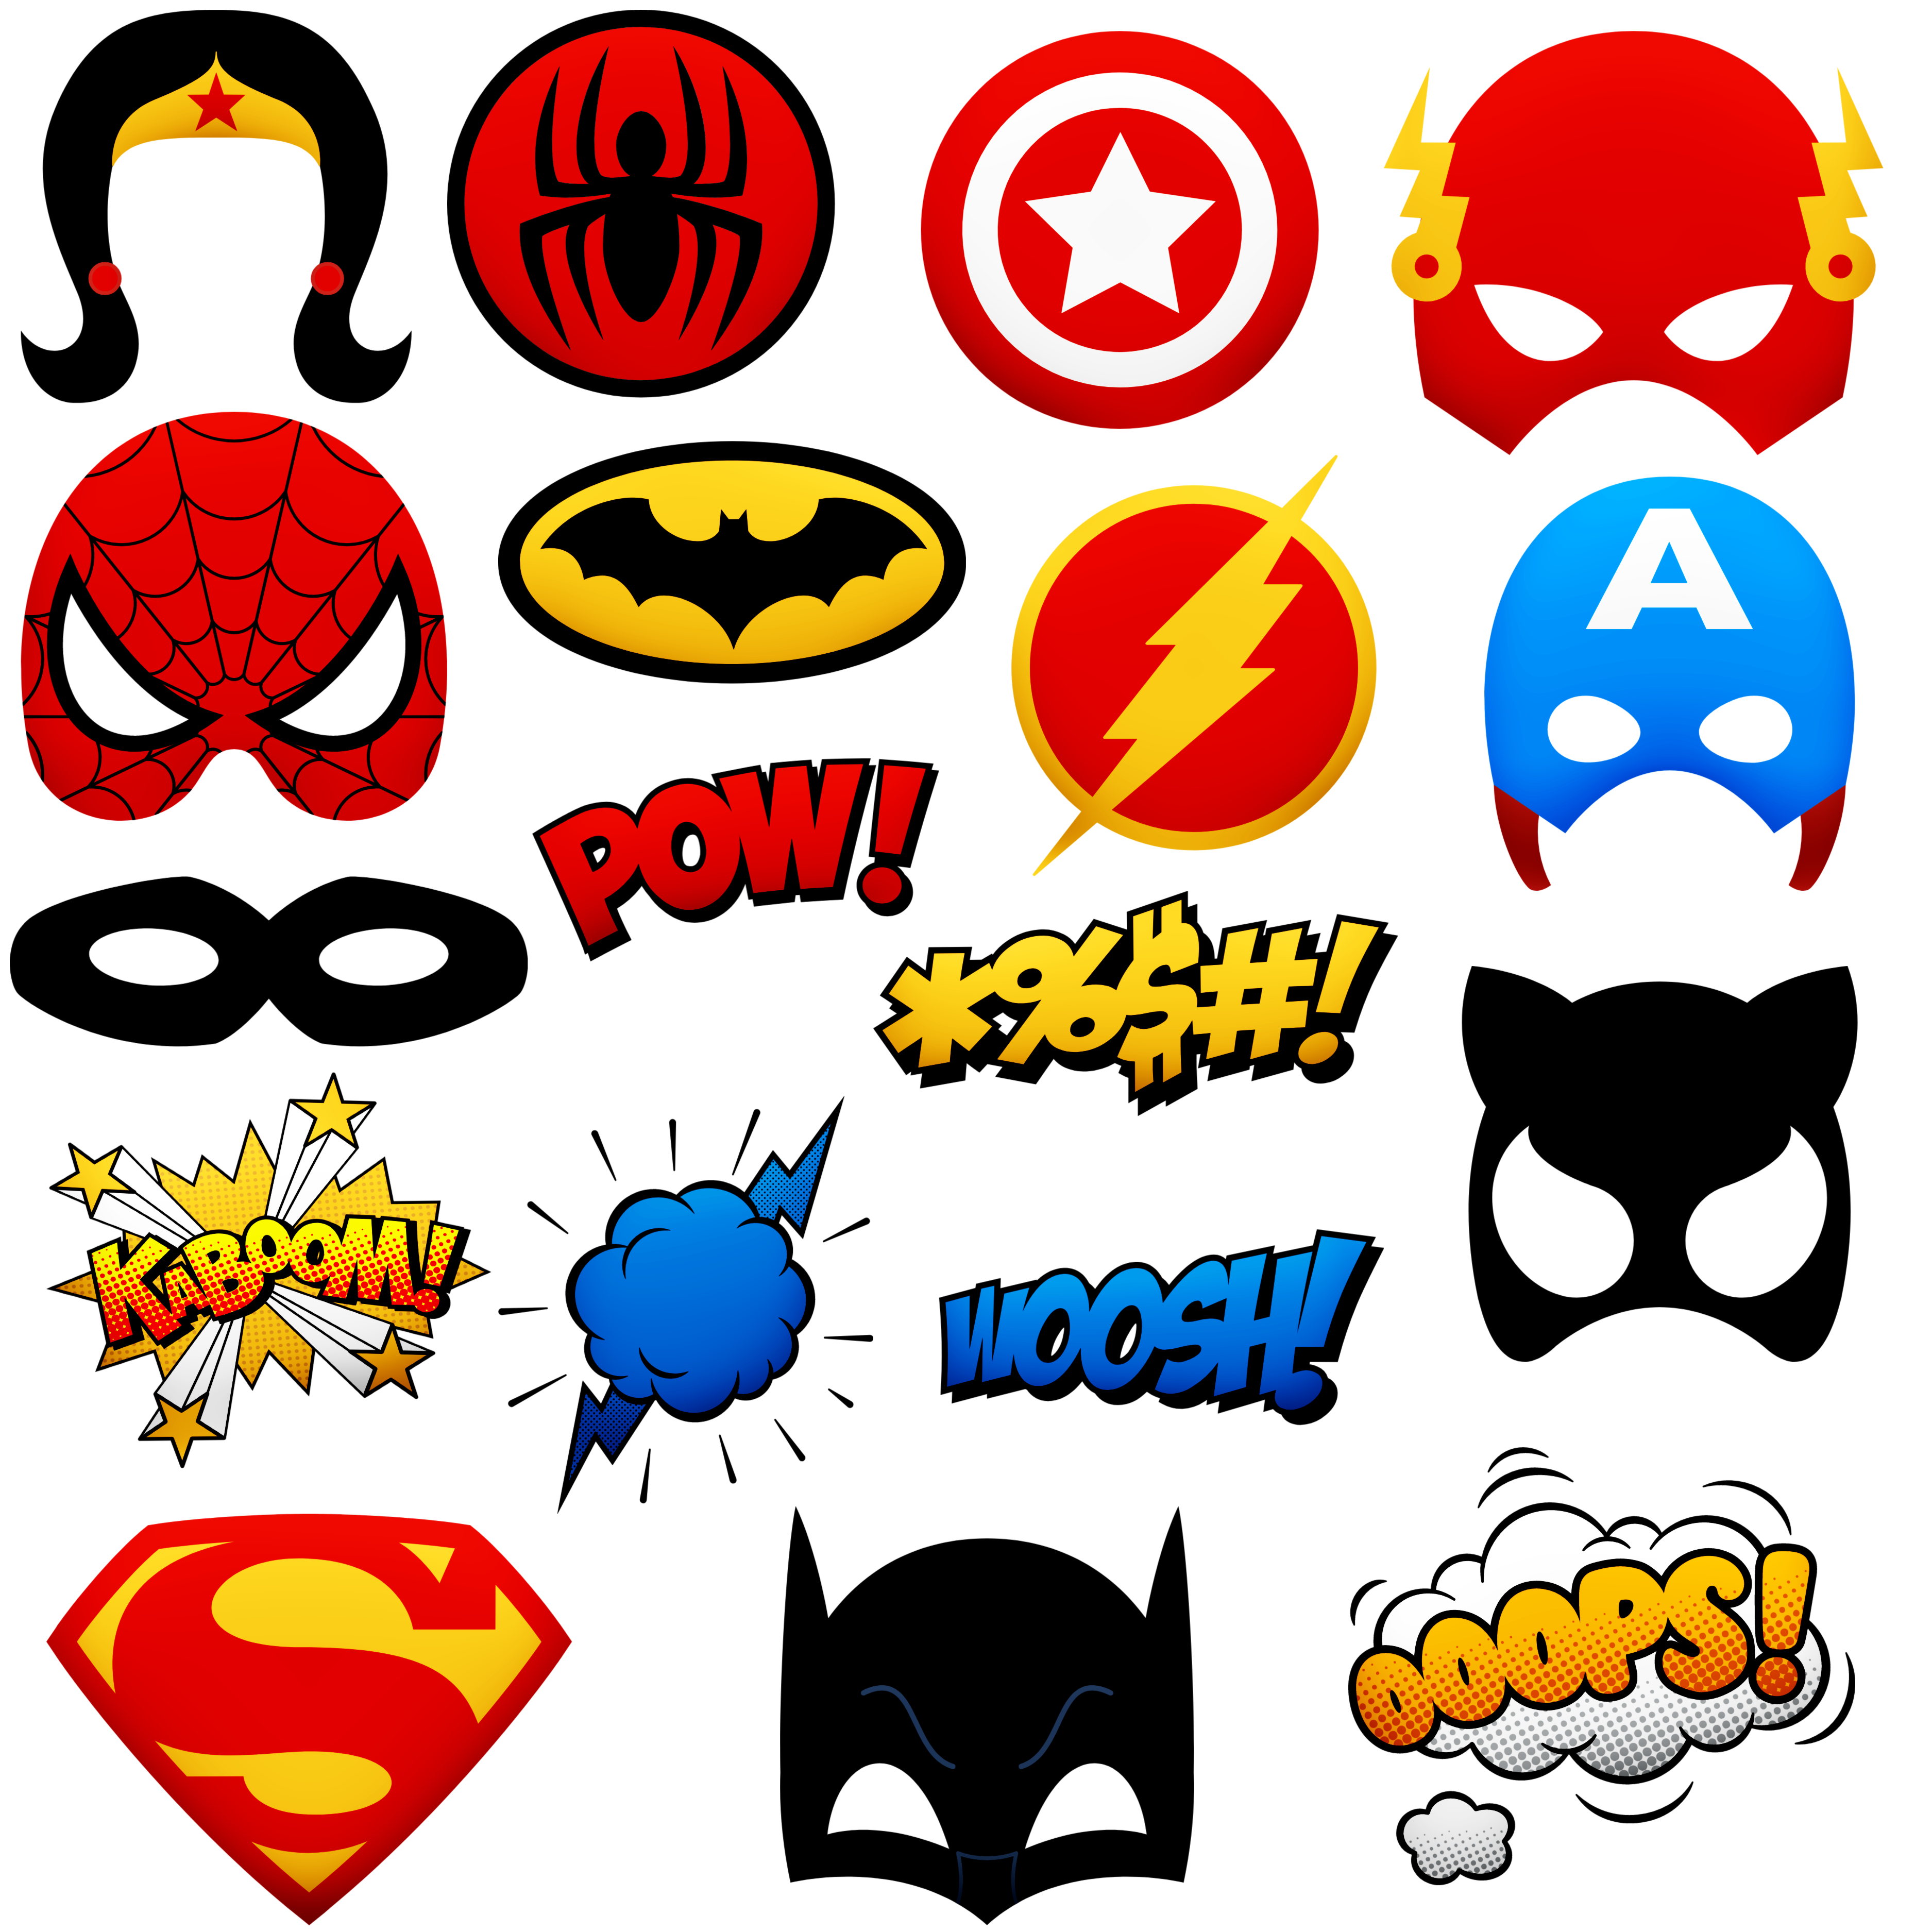 A collage of superhero masks, logos, and words.